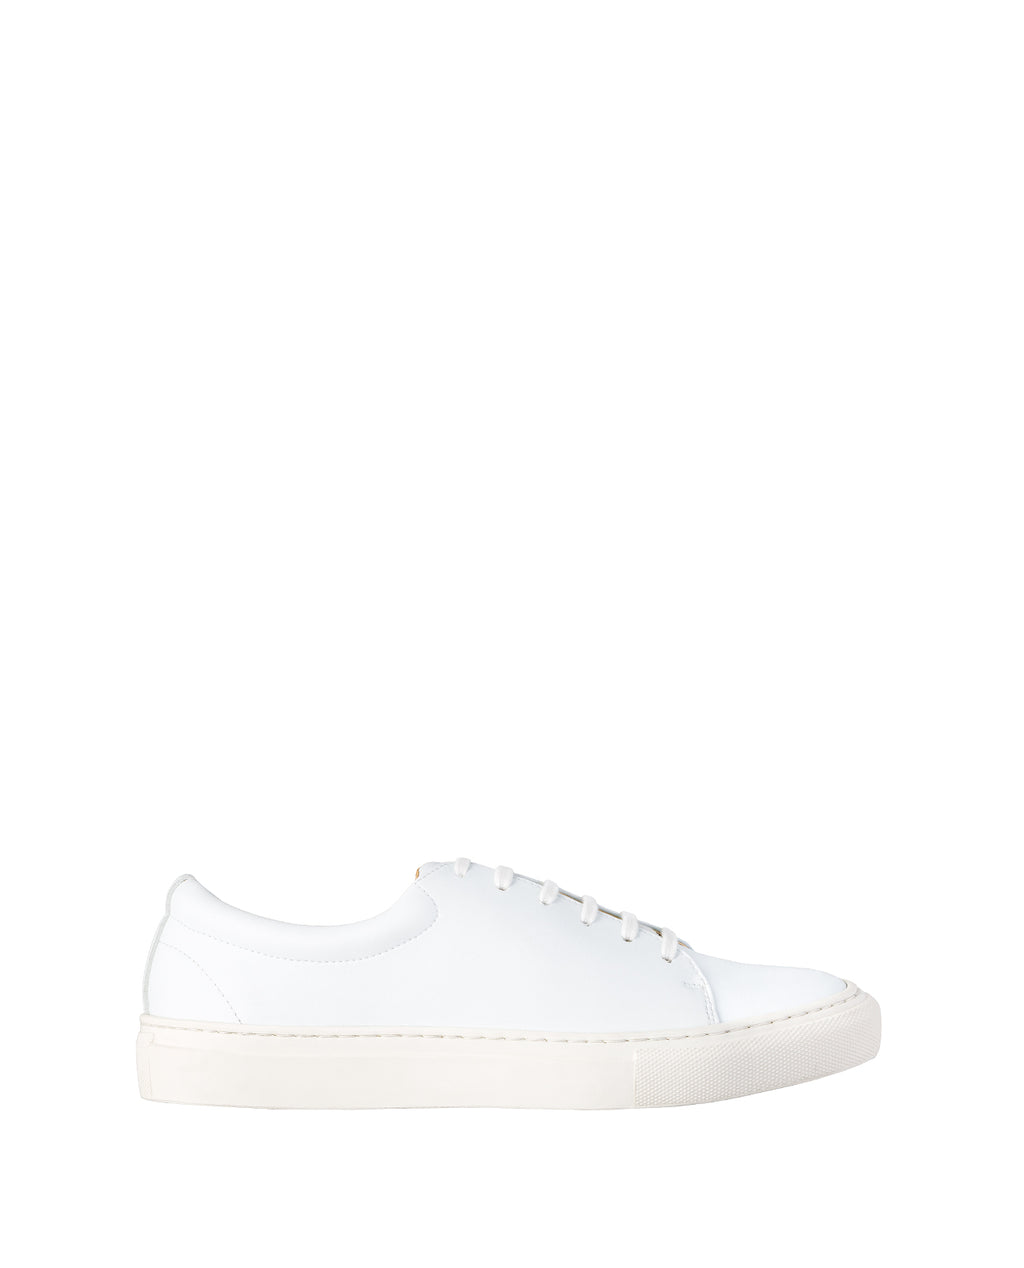 Unisex low sneaker in white eco vegan leather with a white rubber sole.